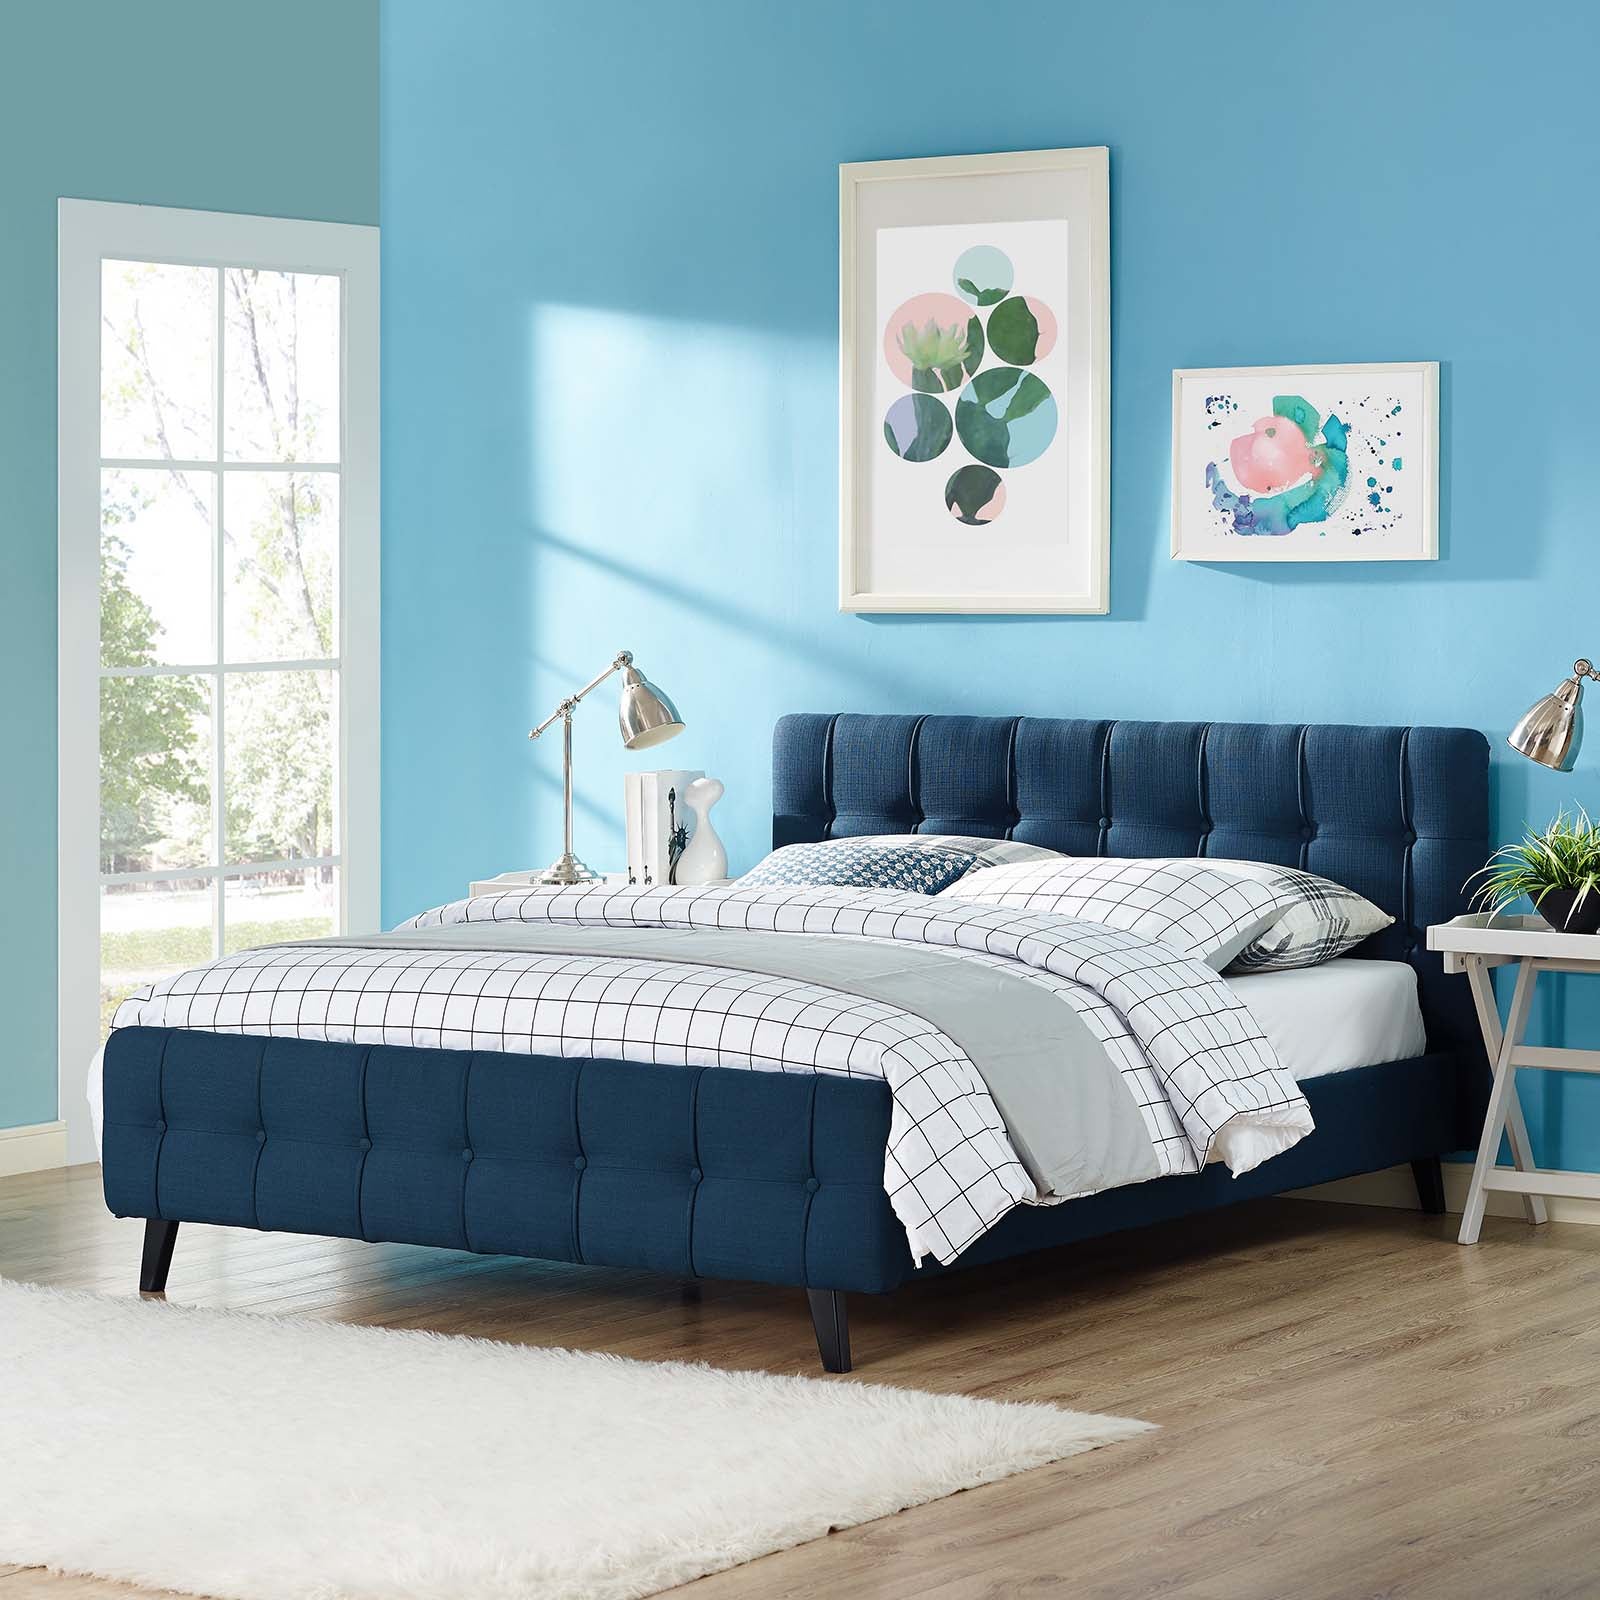 Ophelia Queen Fabric Bed - East Shore Modern Home Furnishings